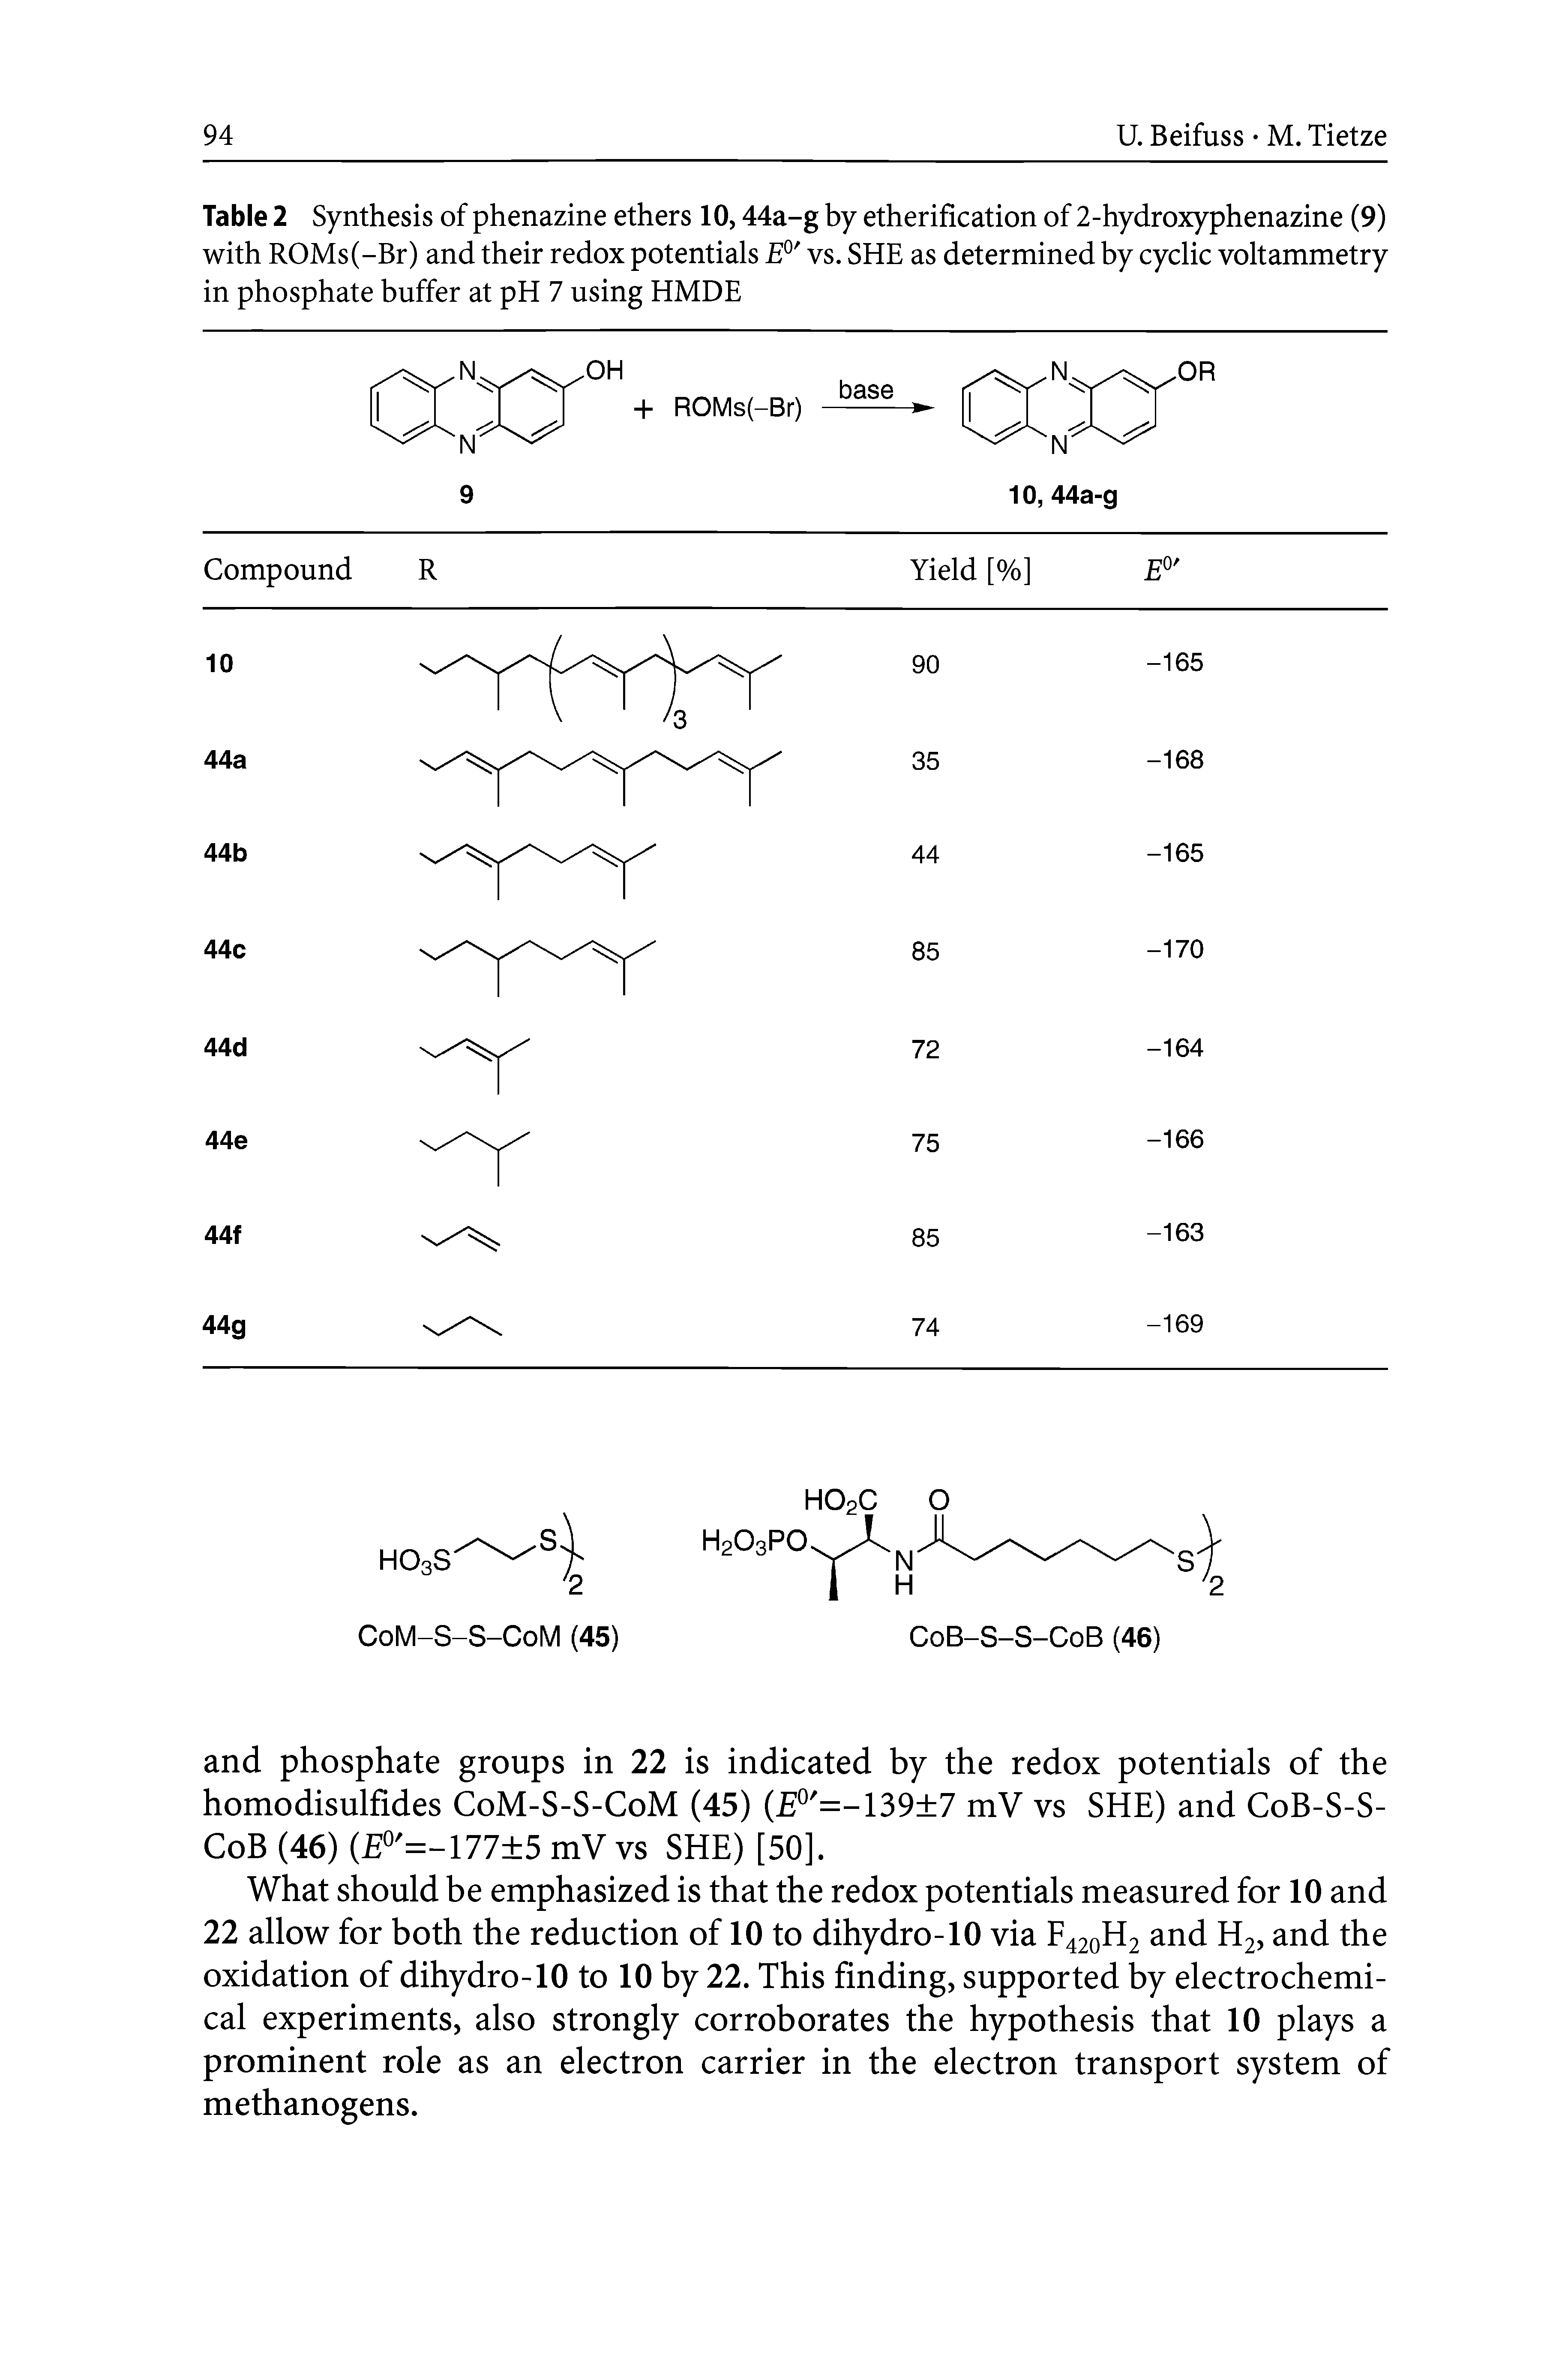 Table 2 Synthesis of phenazine ethers 10,44a-g by etherification of 2-hydroxyphenazine (9) with ROMs(-Br) and their redox potentials vs. SHE as determined by cyclic voltammetry in phosphate buffer at pH 7 using HMDE...